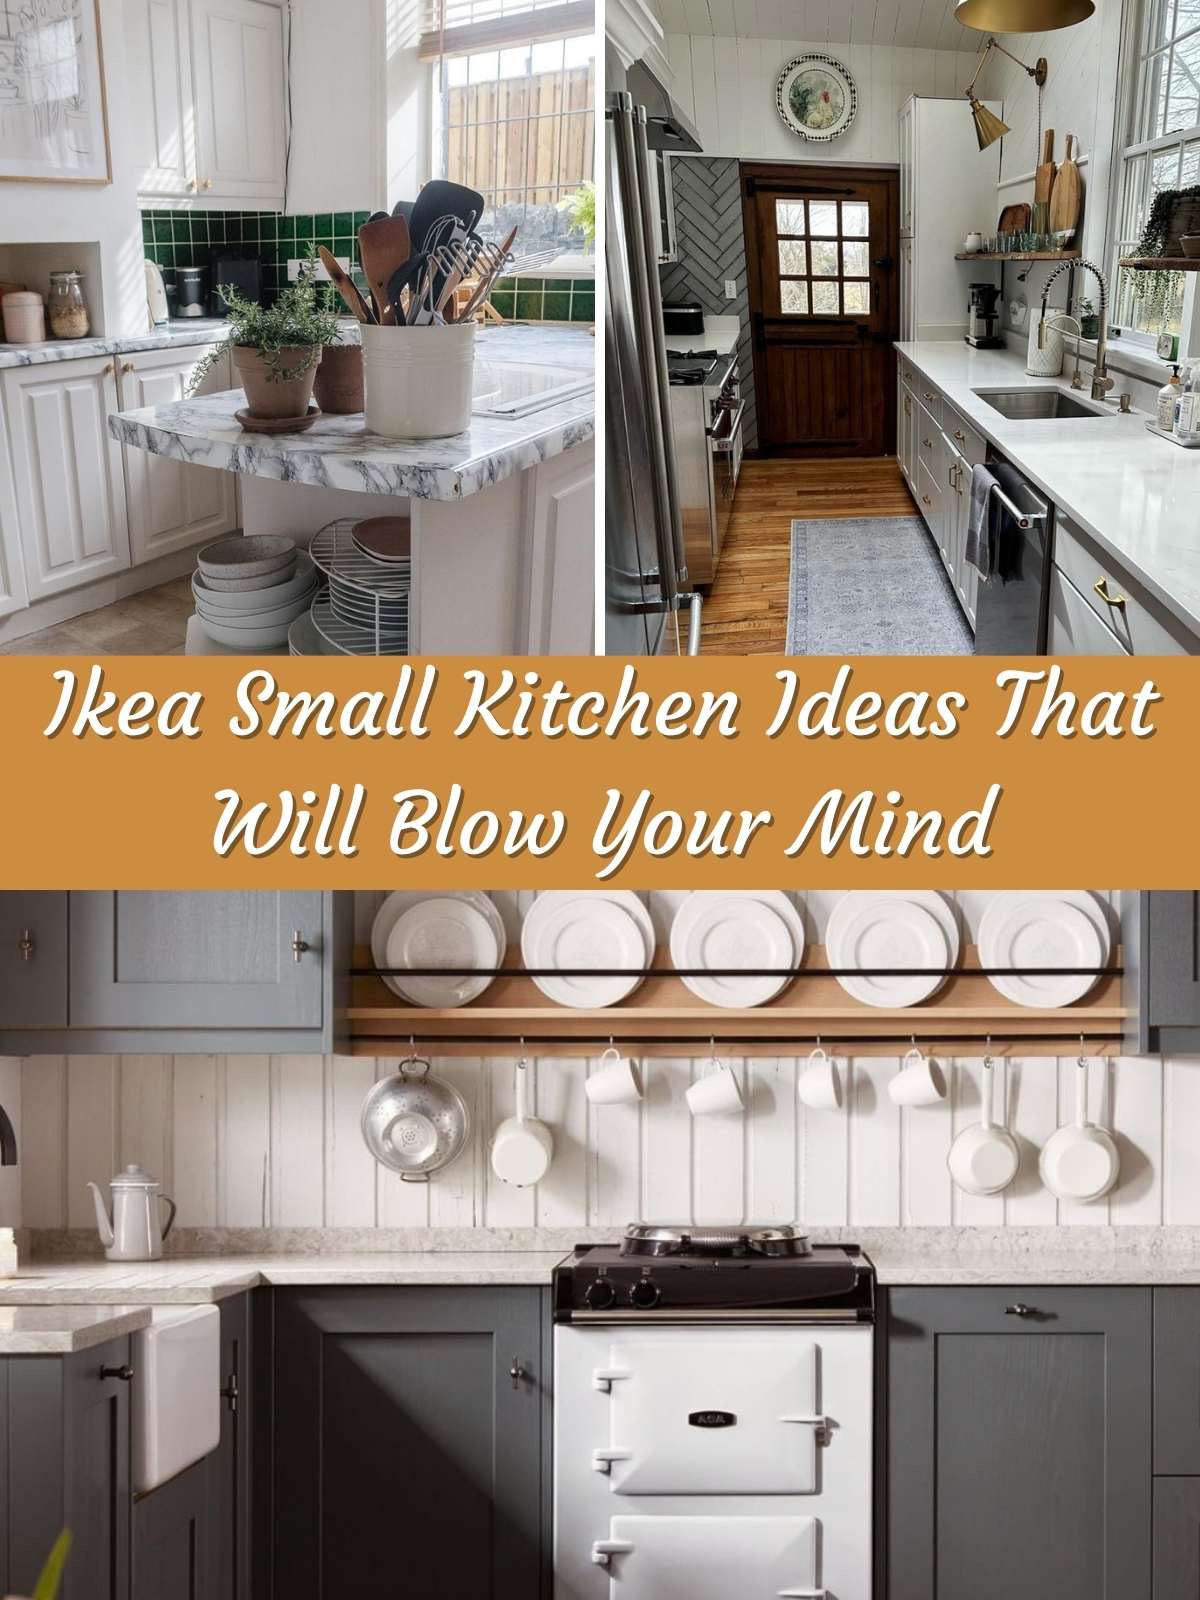 Ikea Small Kitchen Ideas That Will Blow Your Mind. 3 unique styled kitchen